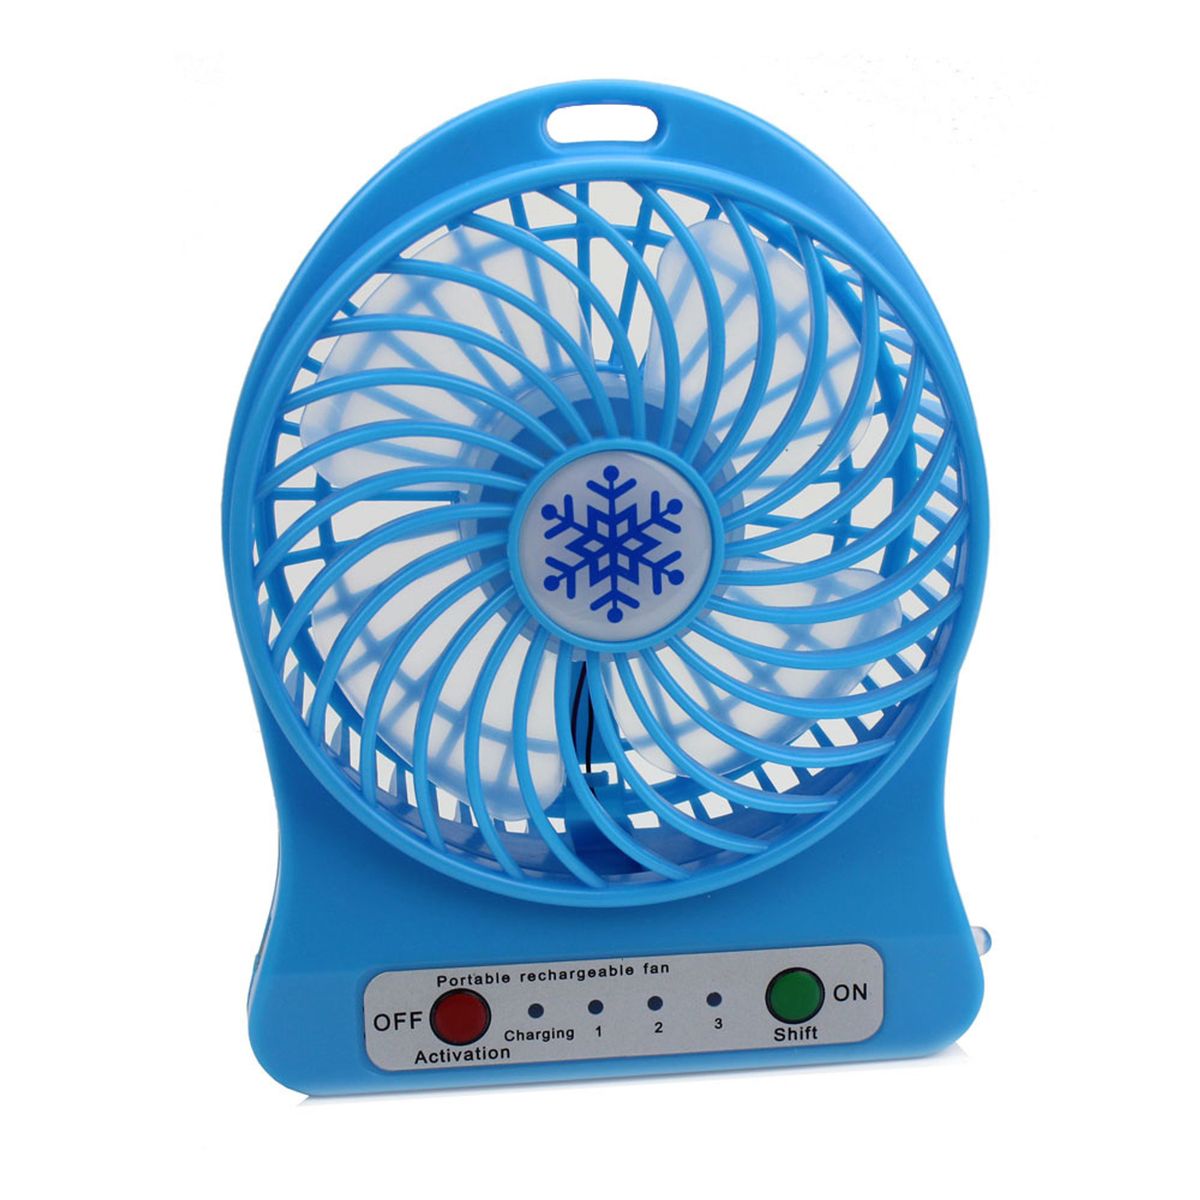 This portable fan will provide relief from sticky heat, available for just Rs 199